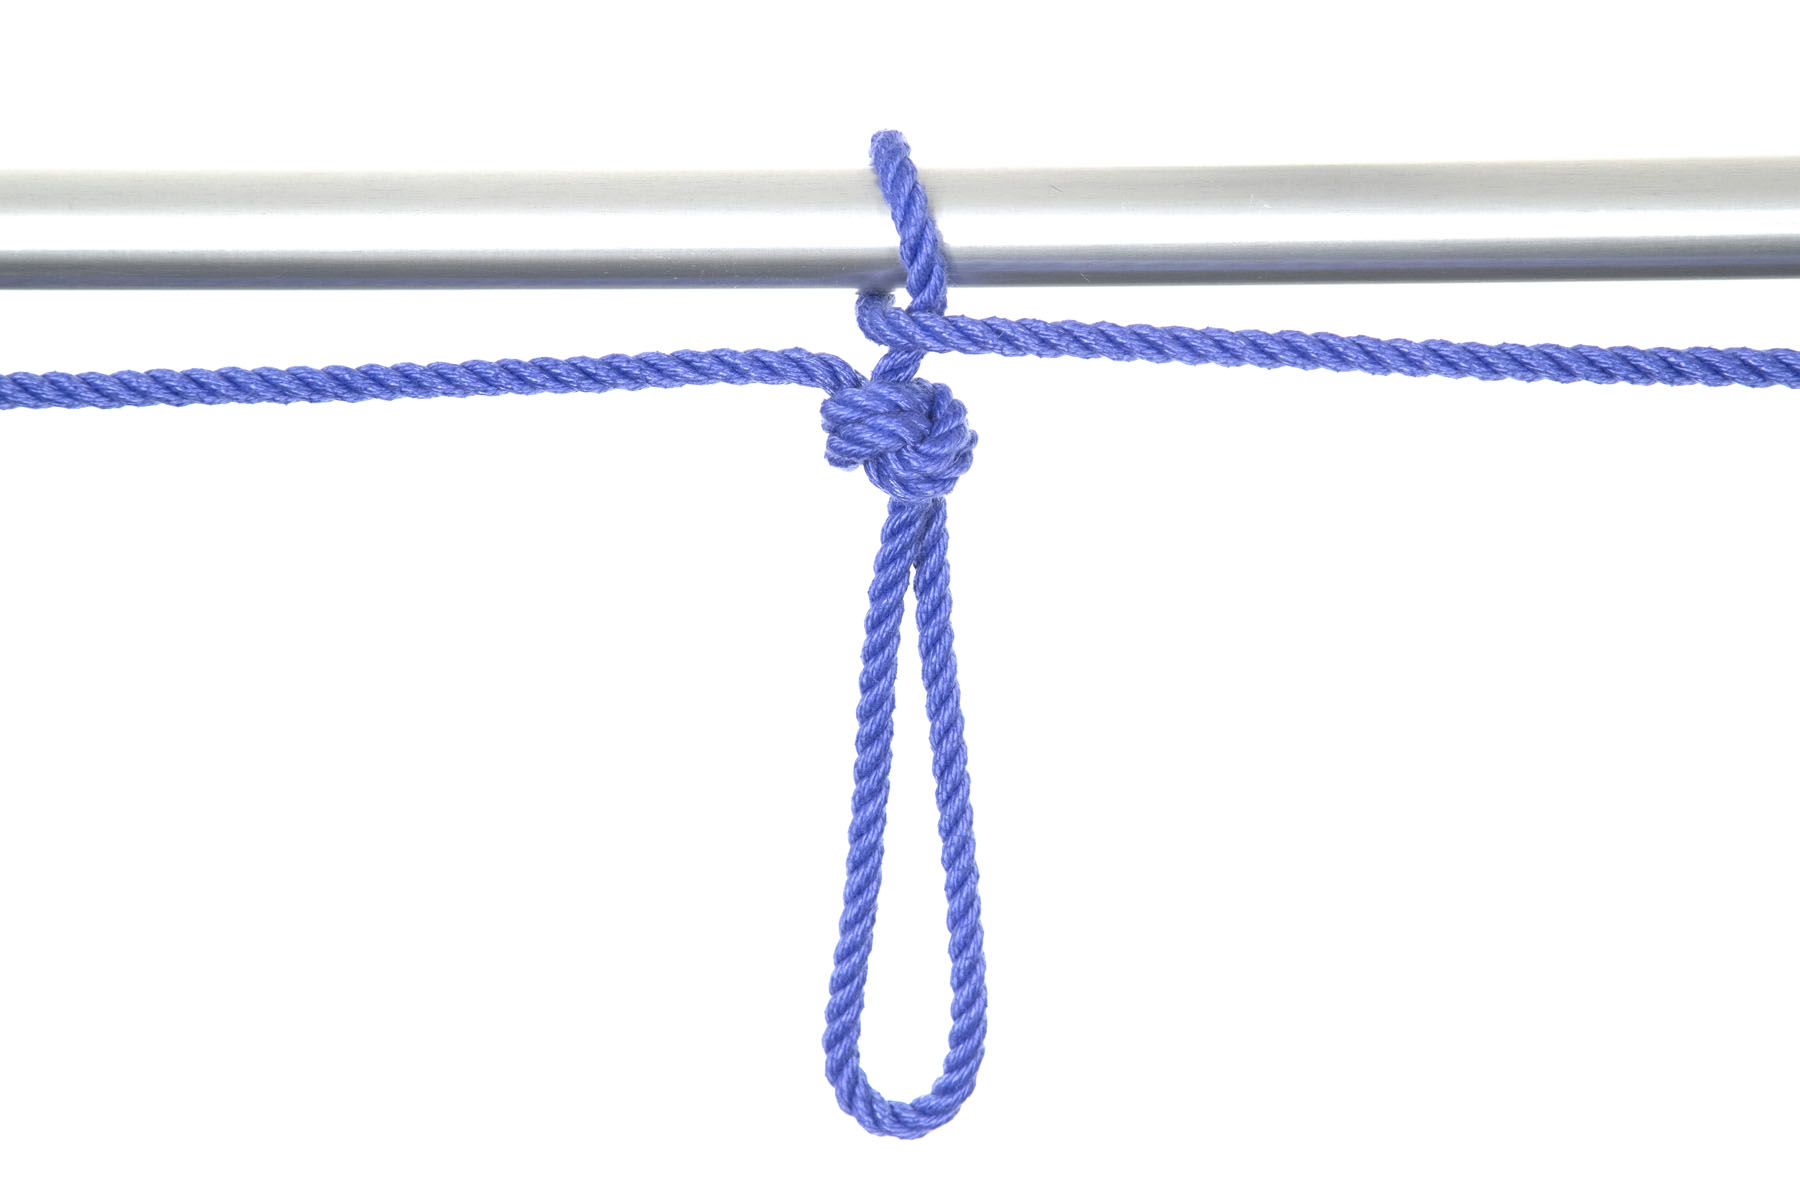 The rope exiting the overhand knot goes over and around the pipe, coming around itself on the left and then exiting the frame to the right. The crossover secures the loop to the pipe.